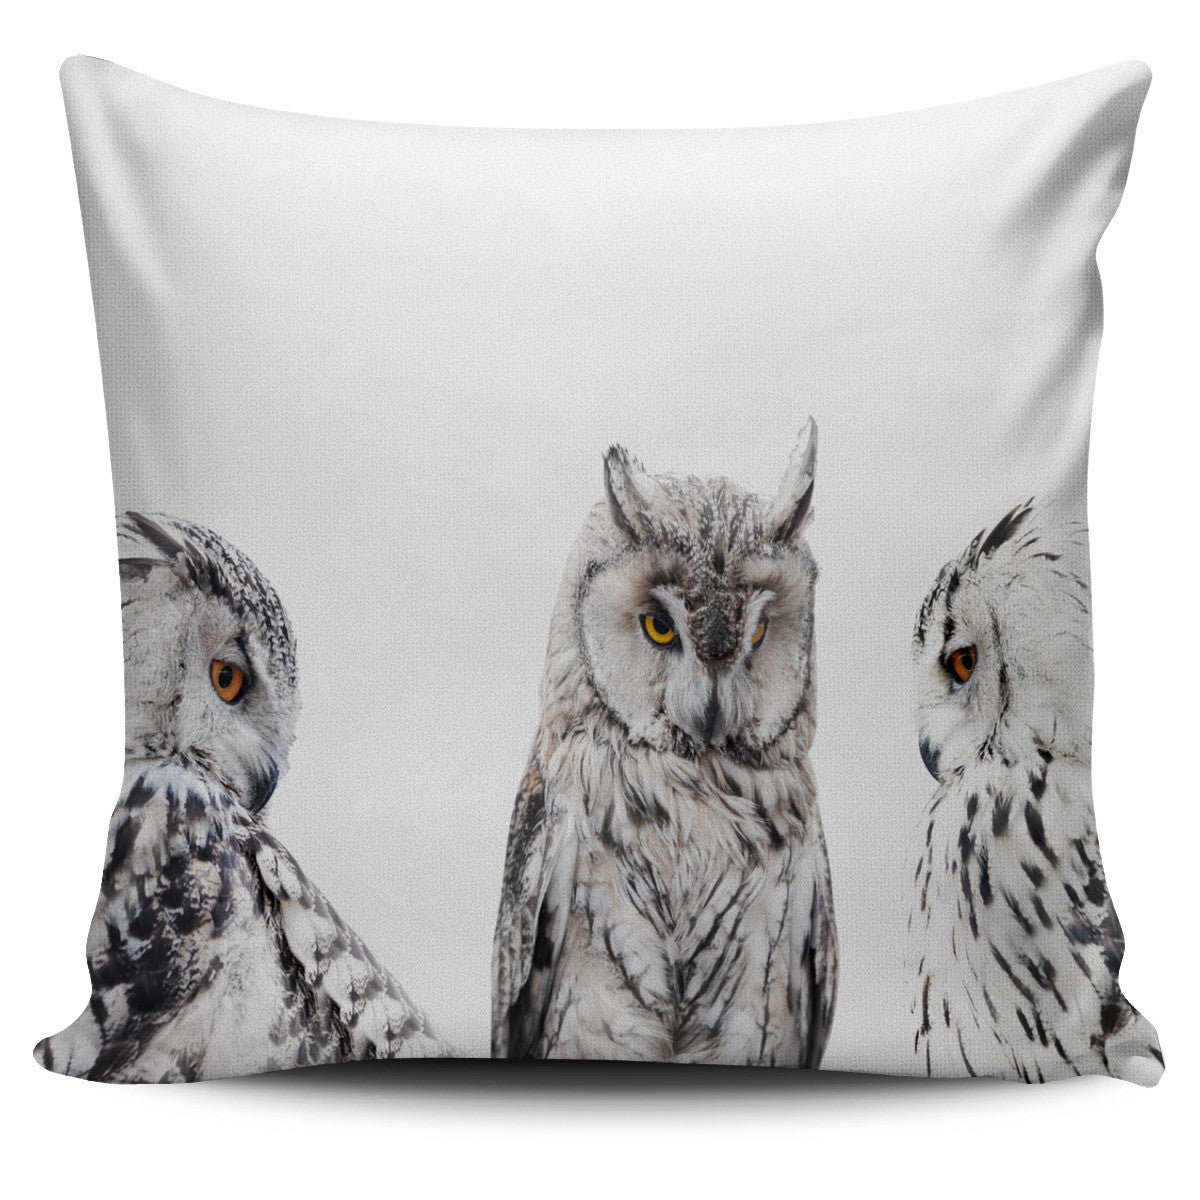 Set of Owls Pillow Cover